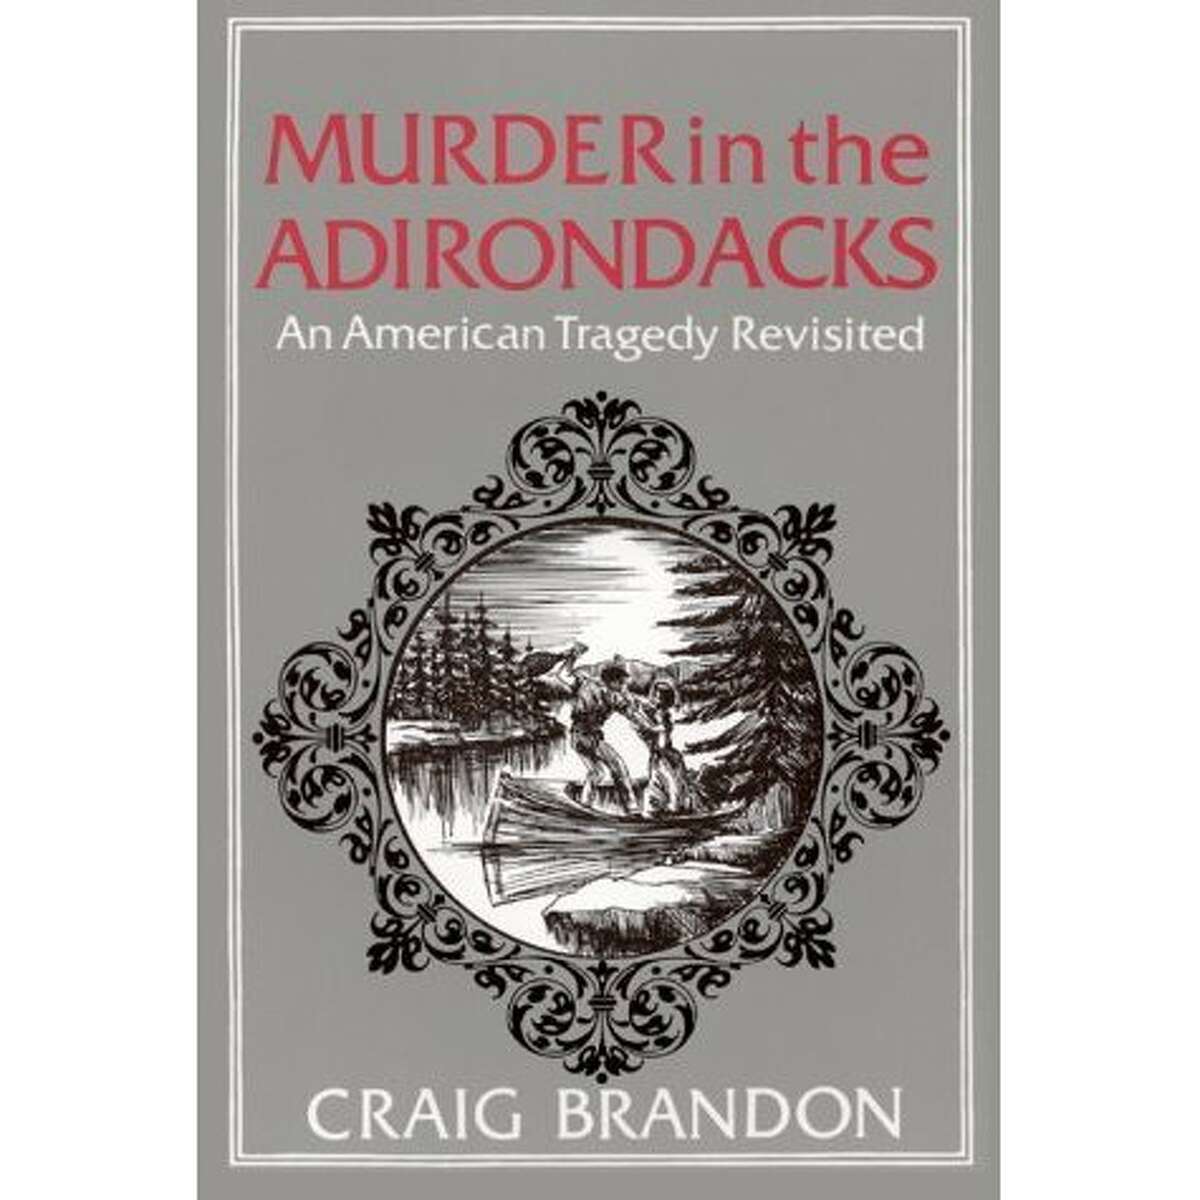 "Murder in the Adirondacks: An American Tragedy Revisited" by Craig Brandon (North Country Books) Brandon, who lives in Vermont, wrote this book over 30 years ago. It tells the tale of the Chester Gillette-Grace Brown murder case that occurred over 100 years ago. That case became the basis for Theodore Dreiser's classic novel "An American Tragedy" and the popular 1951 movie "A Place in the Sun." This revised edition includes 50 new photographs and information from Chester Gillette's prison diary gleaned from 30 additional years of research.